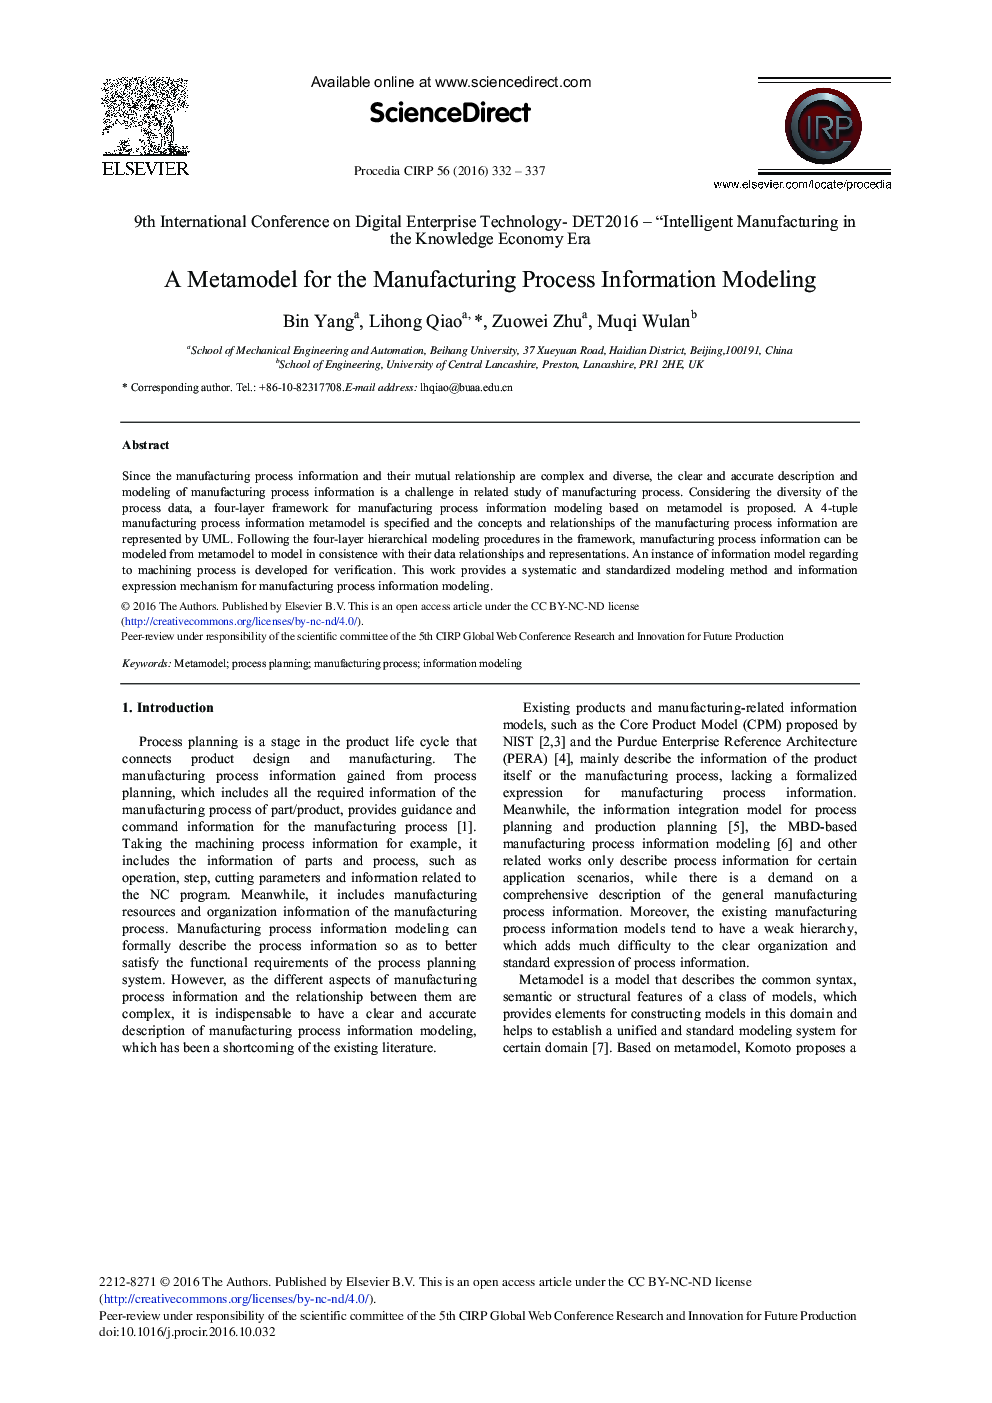 A Metamodel for the Manufacturing Process Information Modeling